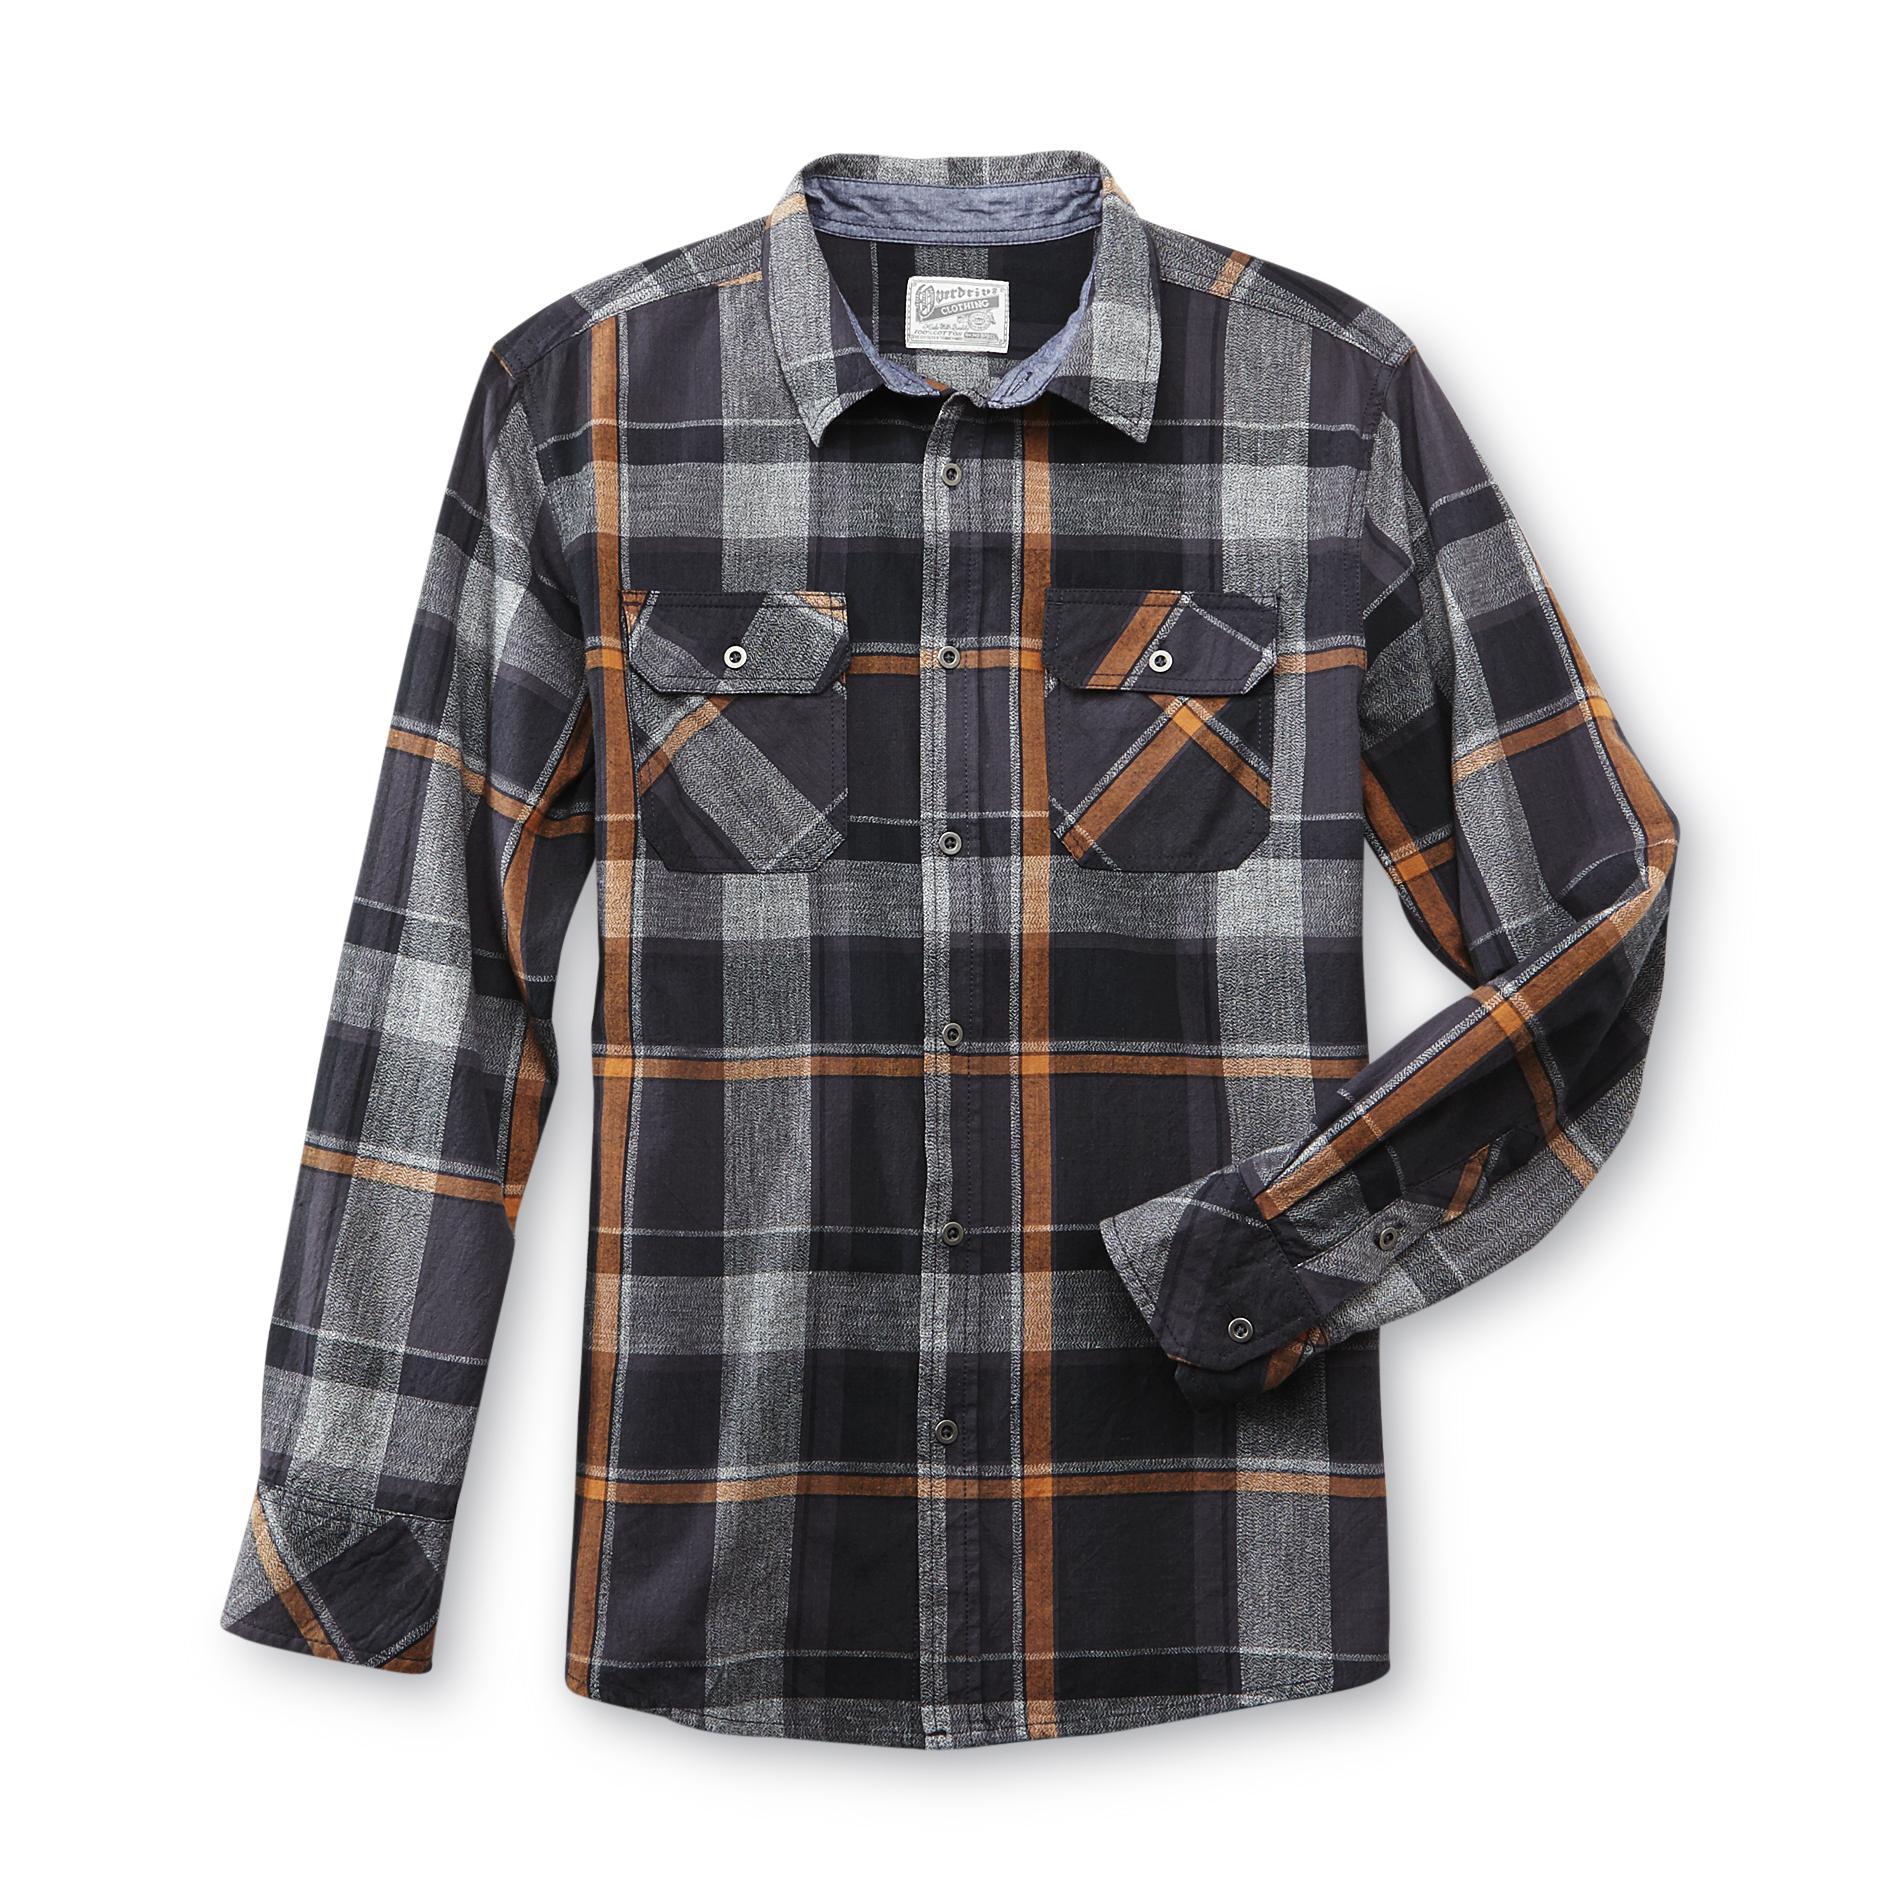 Overdrive Young Men's Long-Sleeve Shirt - Plaid